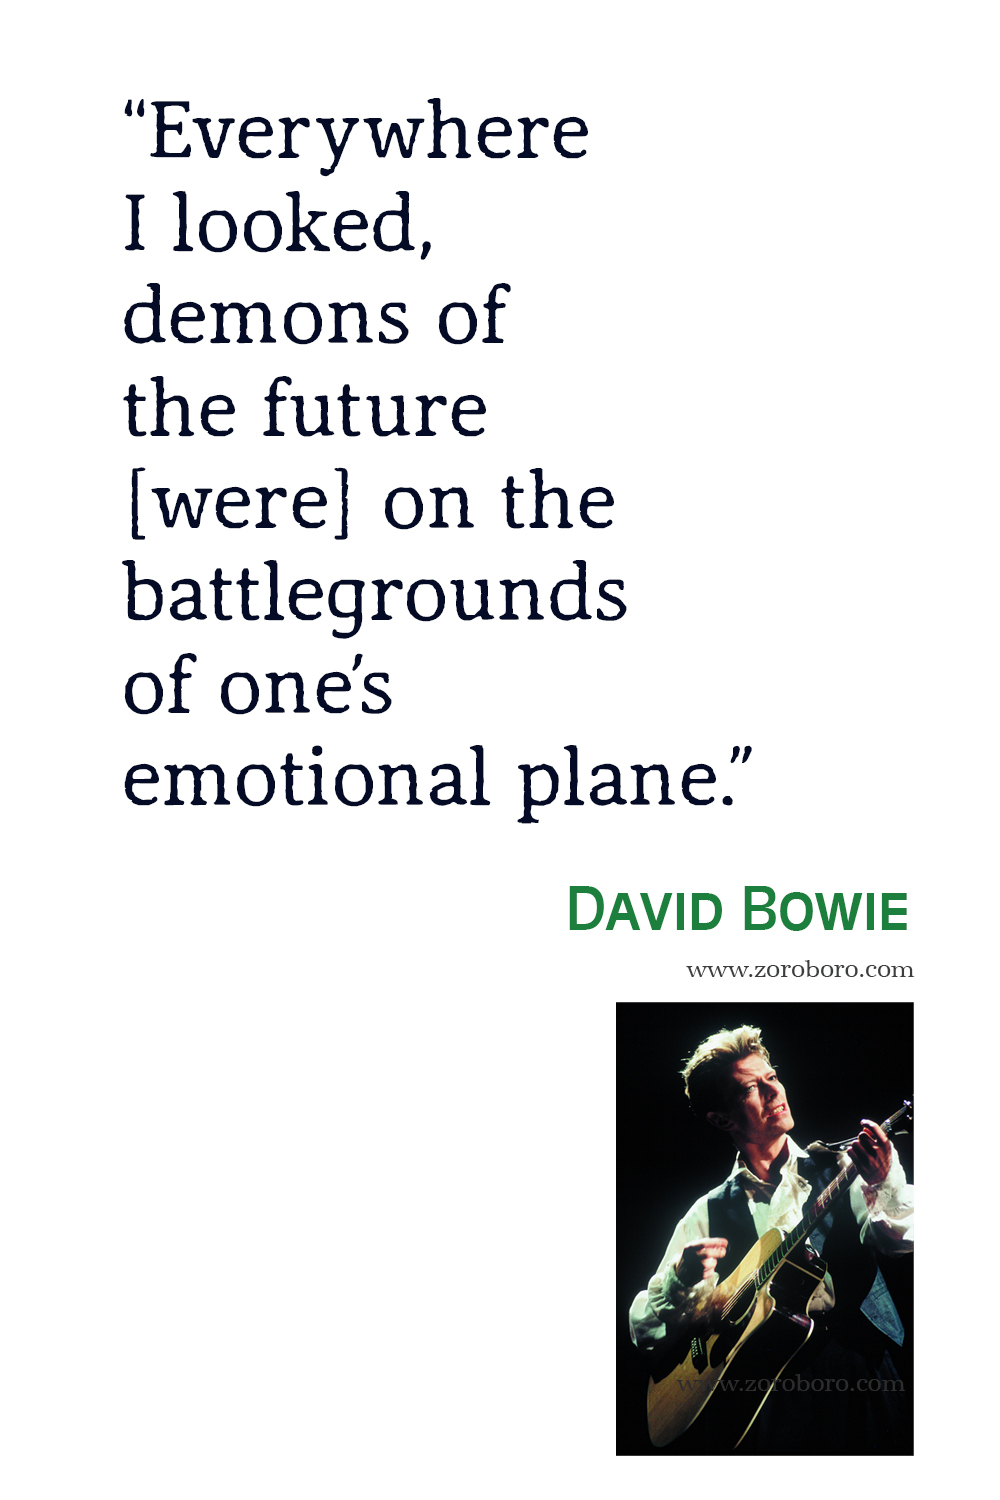 David Bowie Quotes, David Bowie Songs Quotes, David Bowie Lyrics Quotes, David Bowie Posters, David Bowie The Songs Of David Bowie, Quicksand, Lazarus, Station to Station, Moonage Daydream, All the Madmen, Fill Your Heart, The Man Who Sold the World Quotes, Heroes.